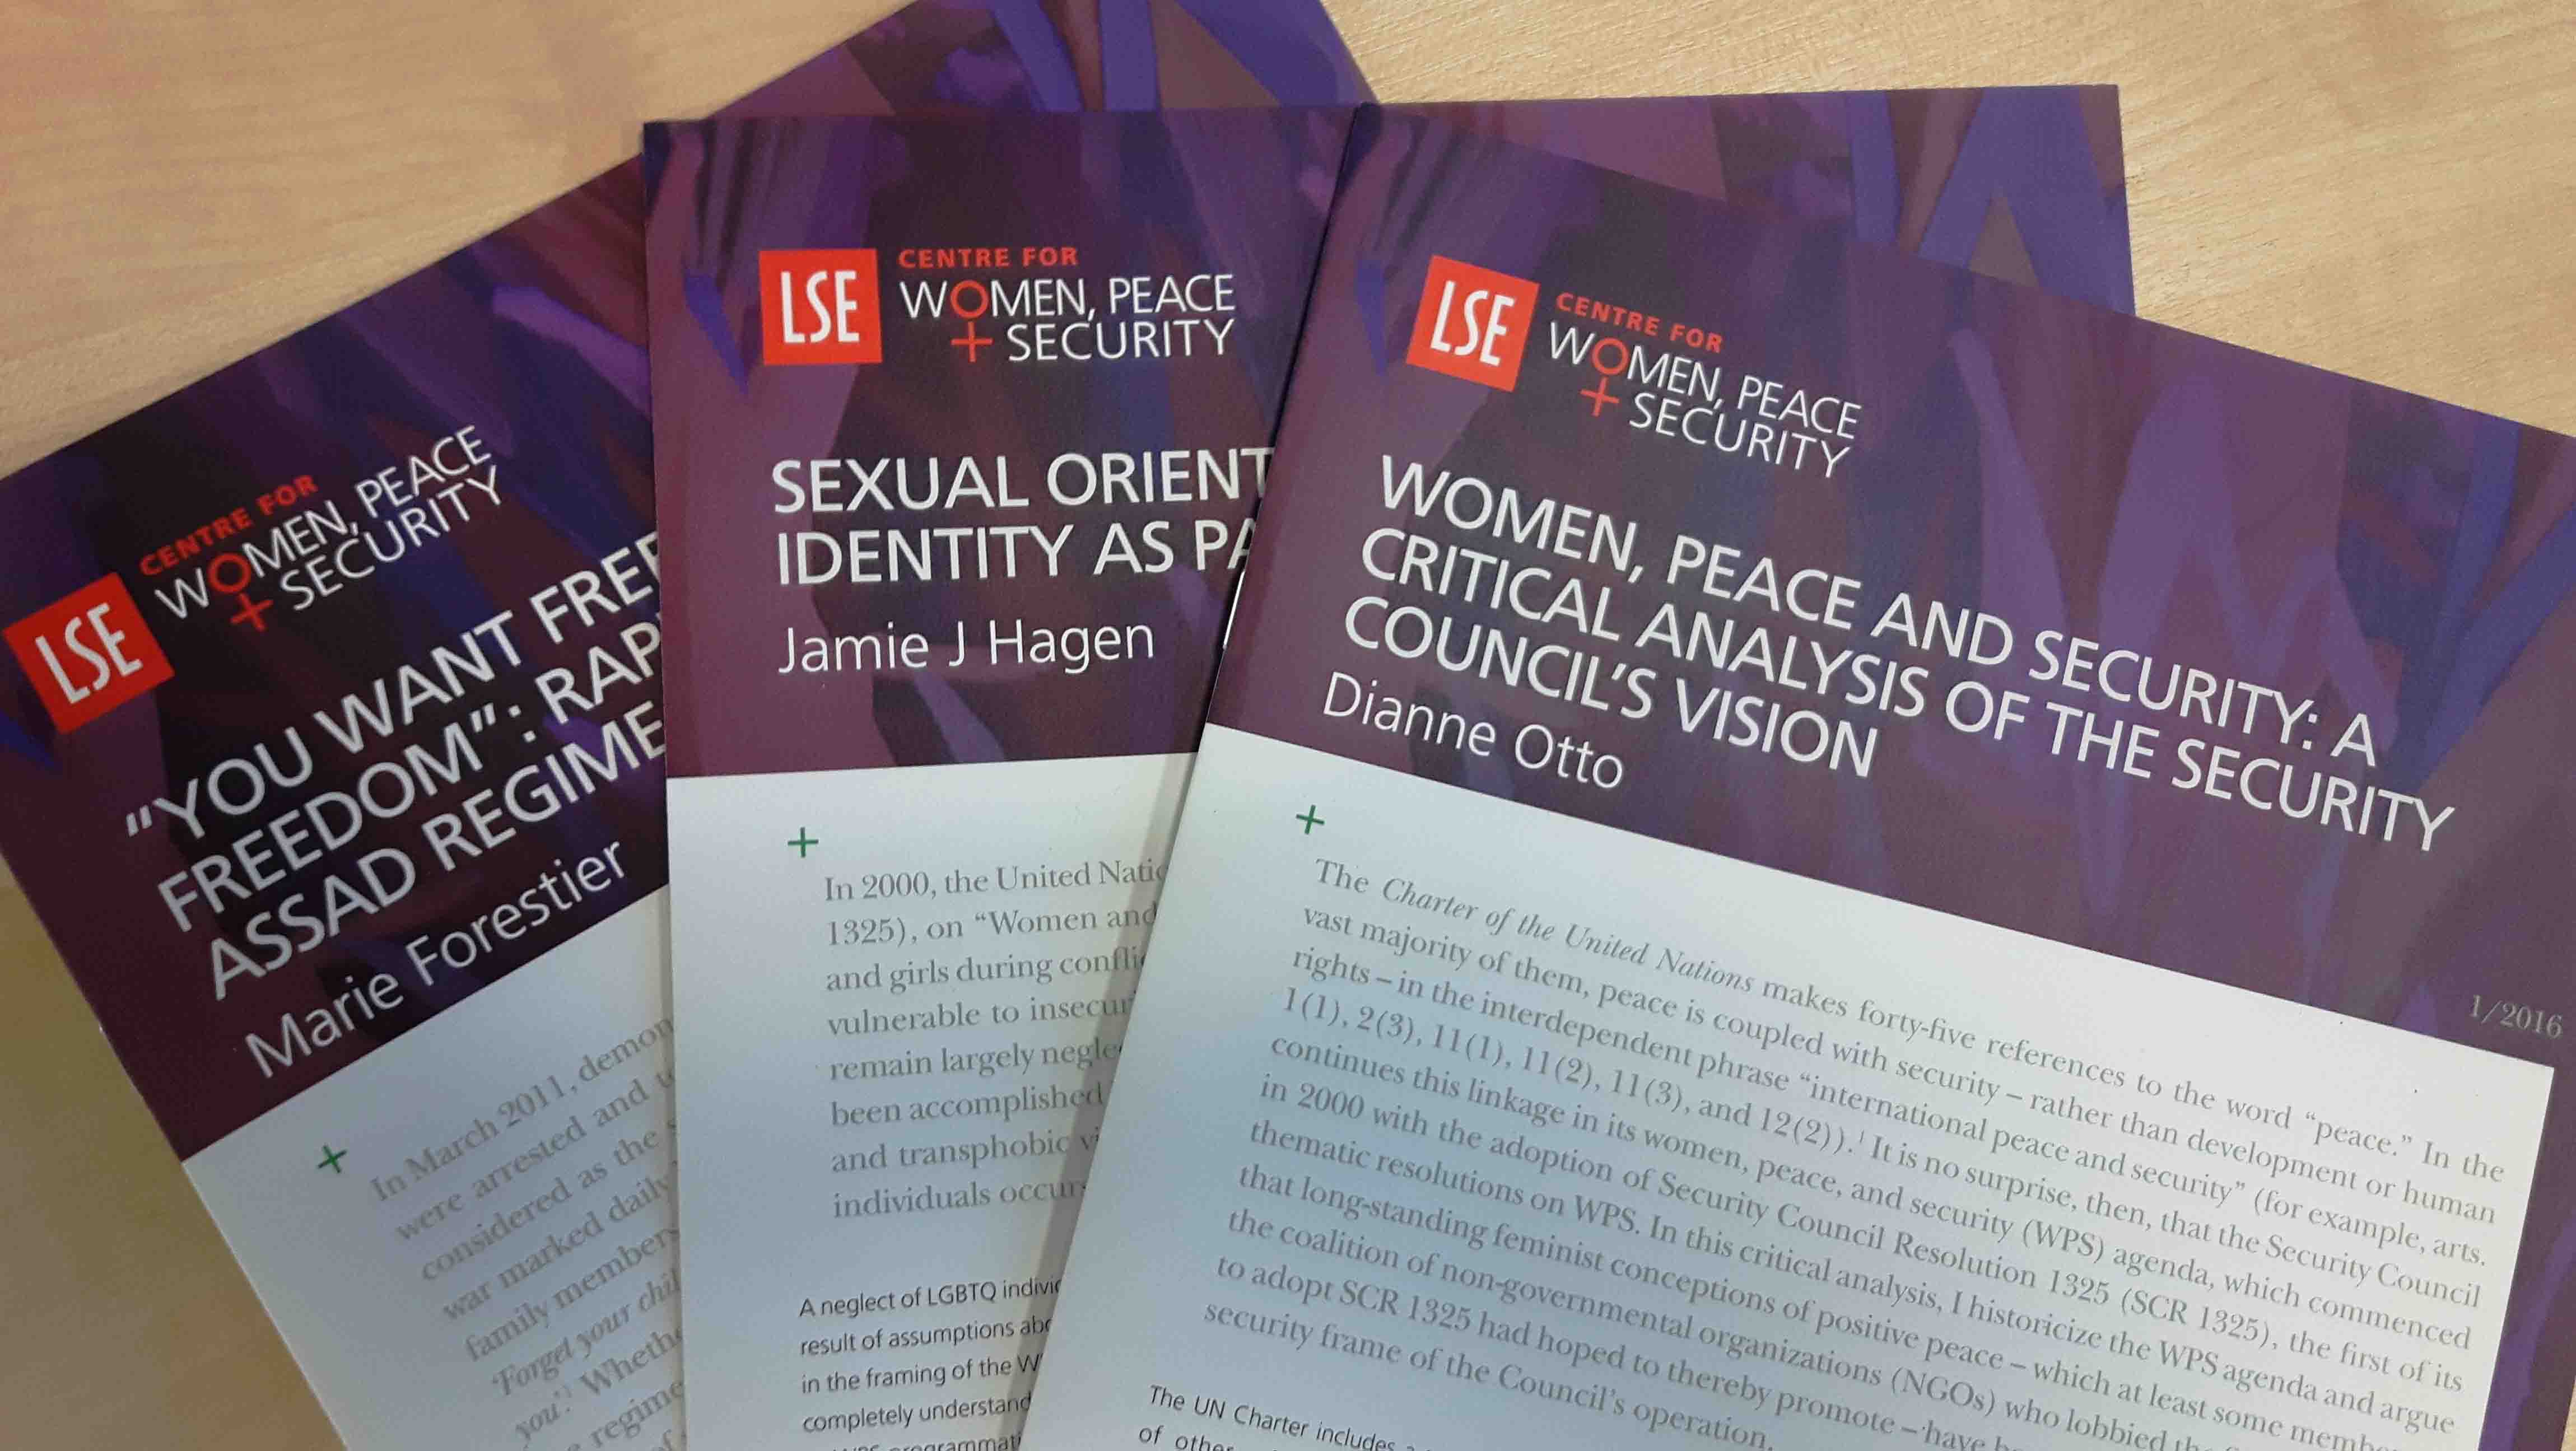 Women, peace and security working papers